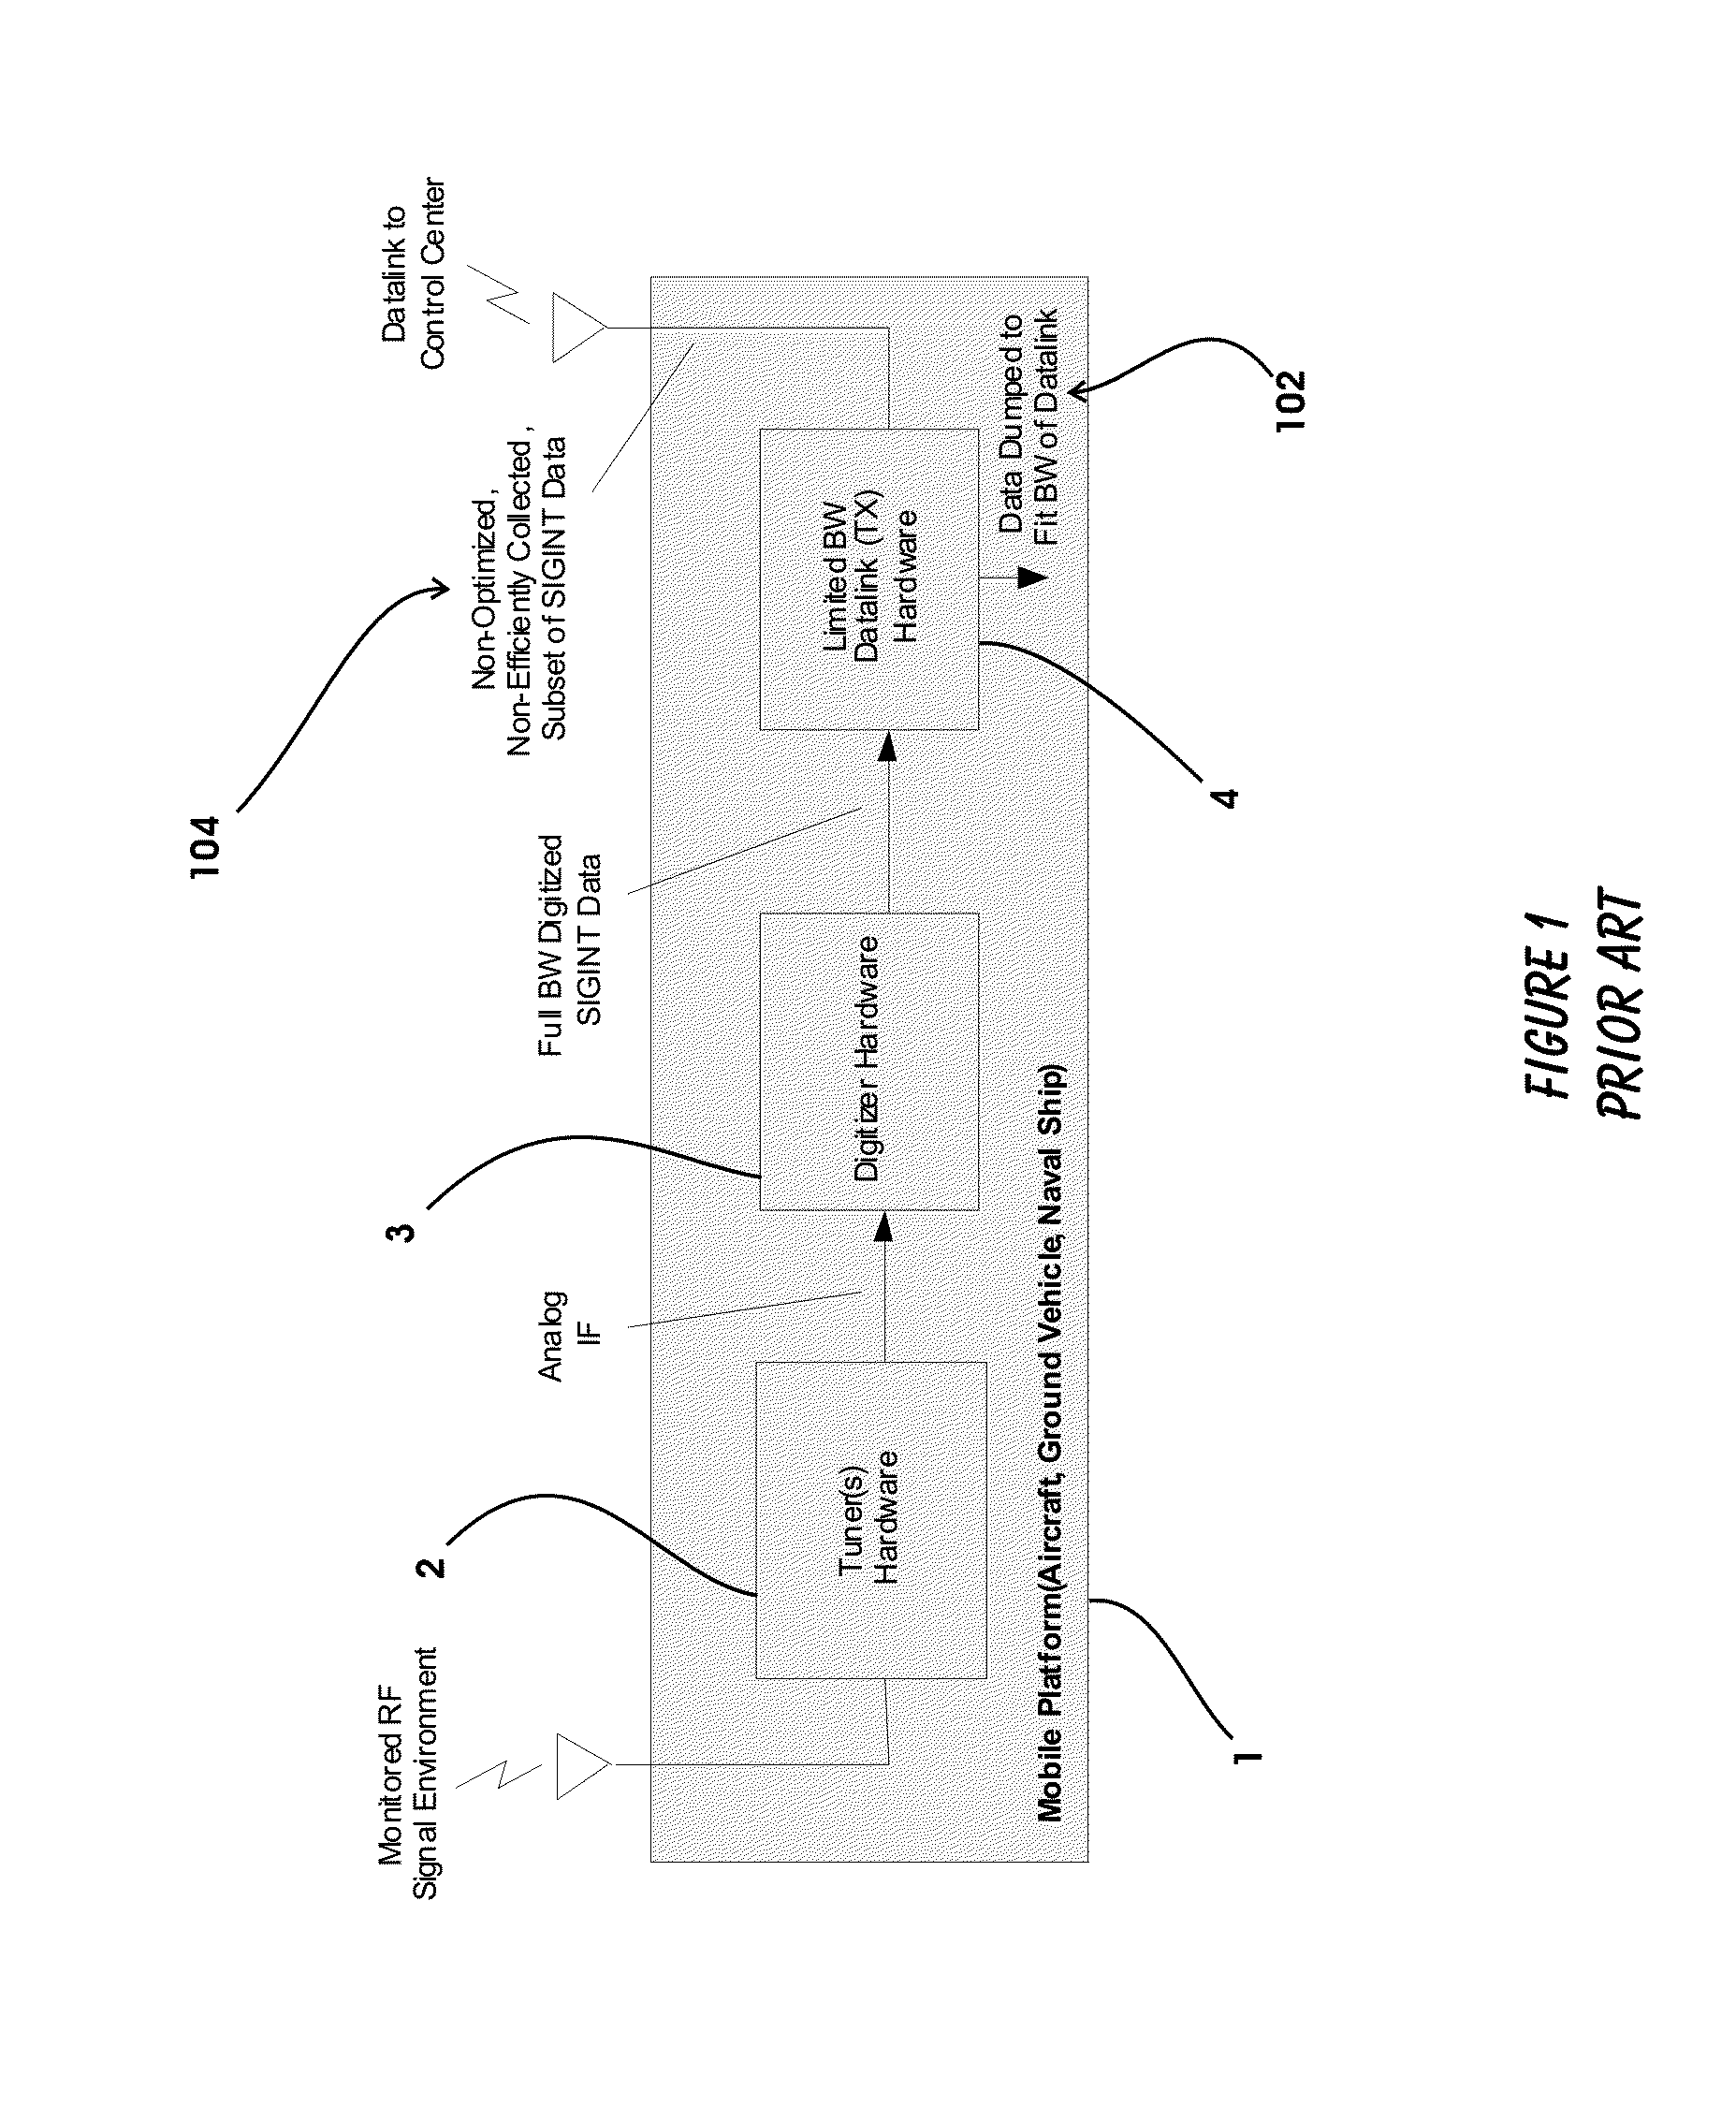 Method and System For Optimizing The Efficiency of SIGINT Collection Systems on Mobile Platforms with Limited Bandwidth Connections